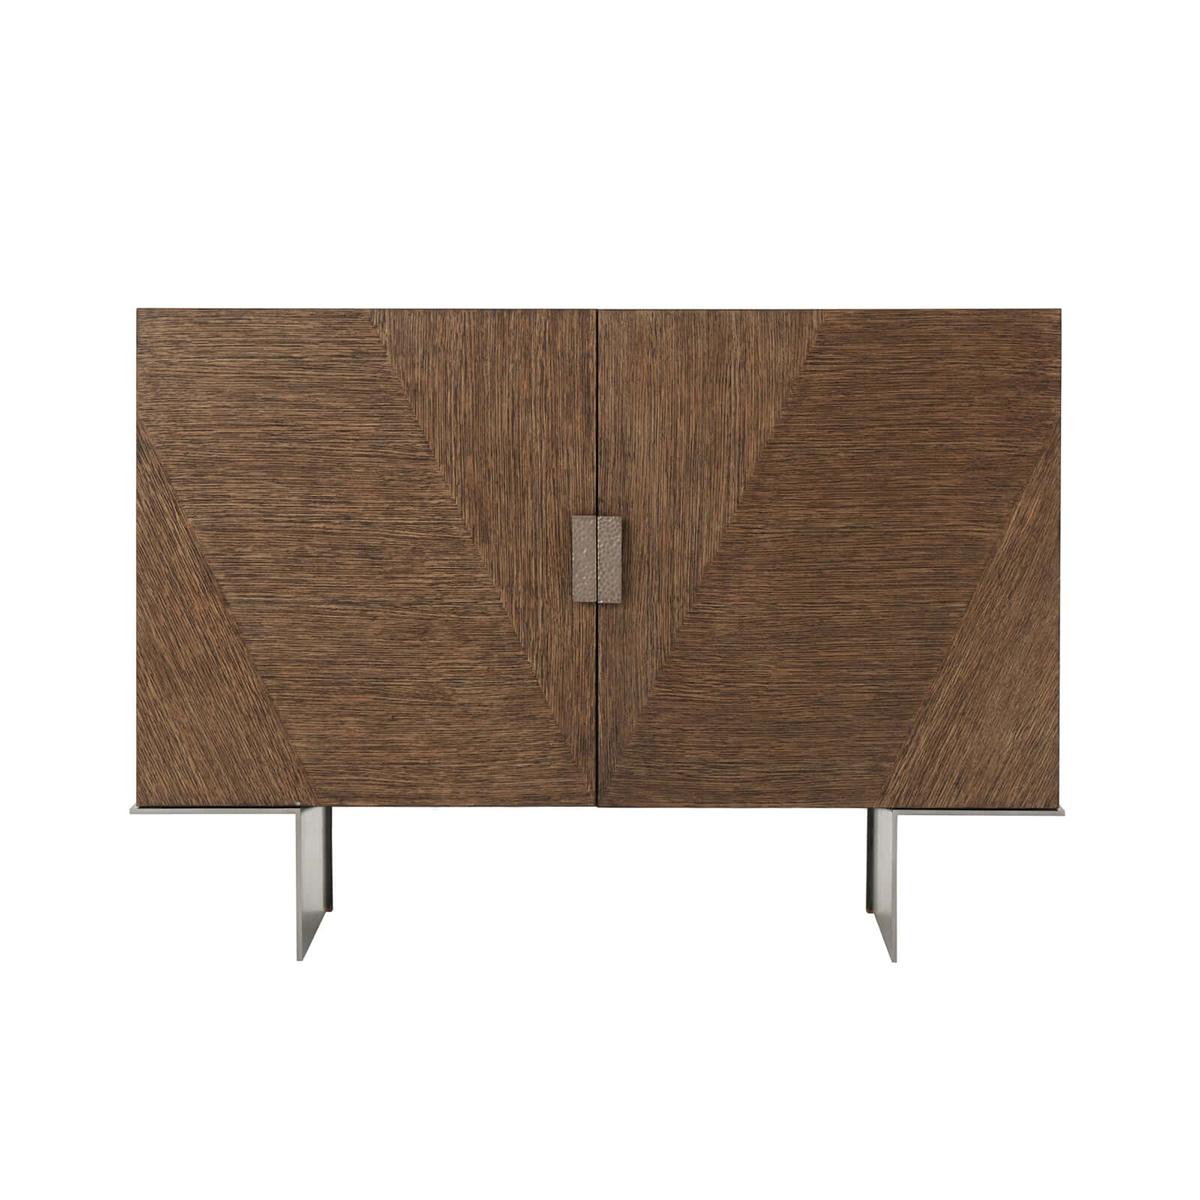 Dark oak Modern media cabinet, in our brushed oak Charteris finish with a subtle chevron parquetry detail on the doors. The split interior with an adjustable shelf to one side and central drawer on the other. The cabinet is raised on a cantilevered